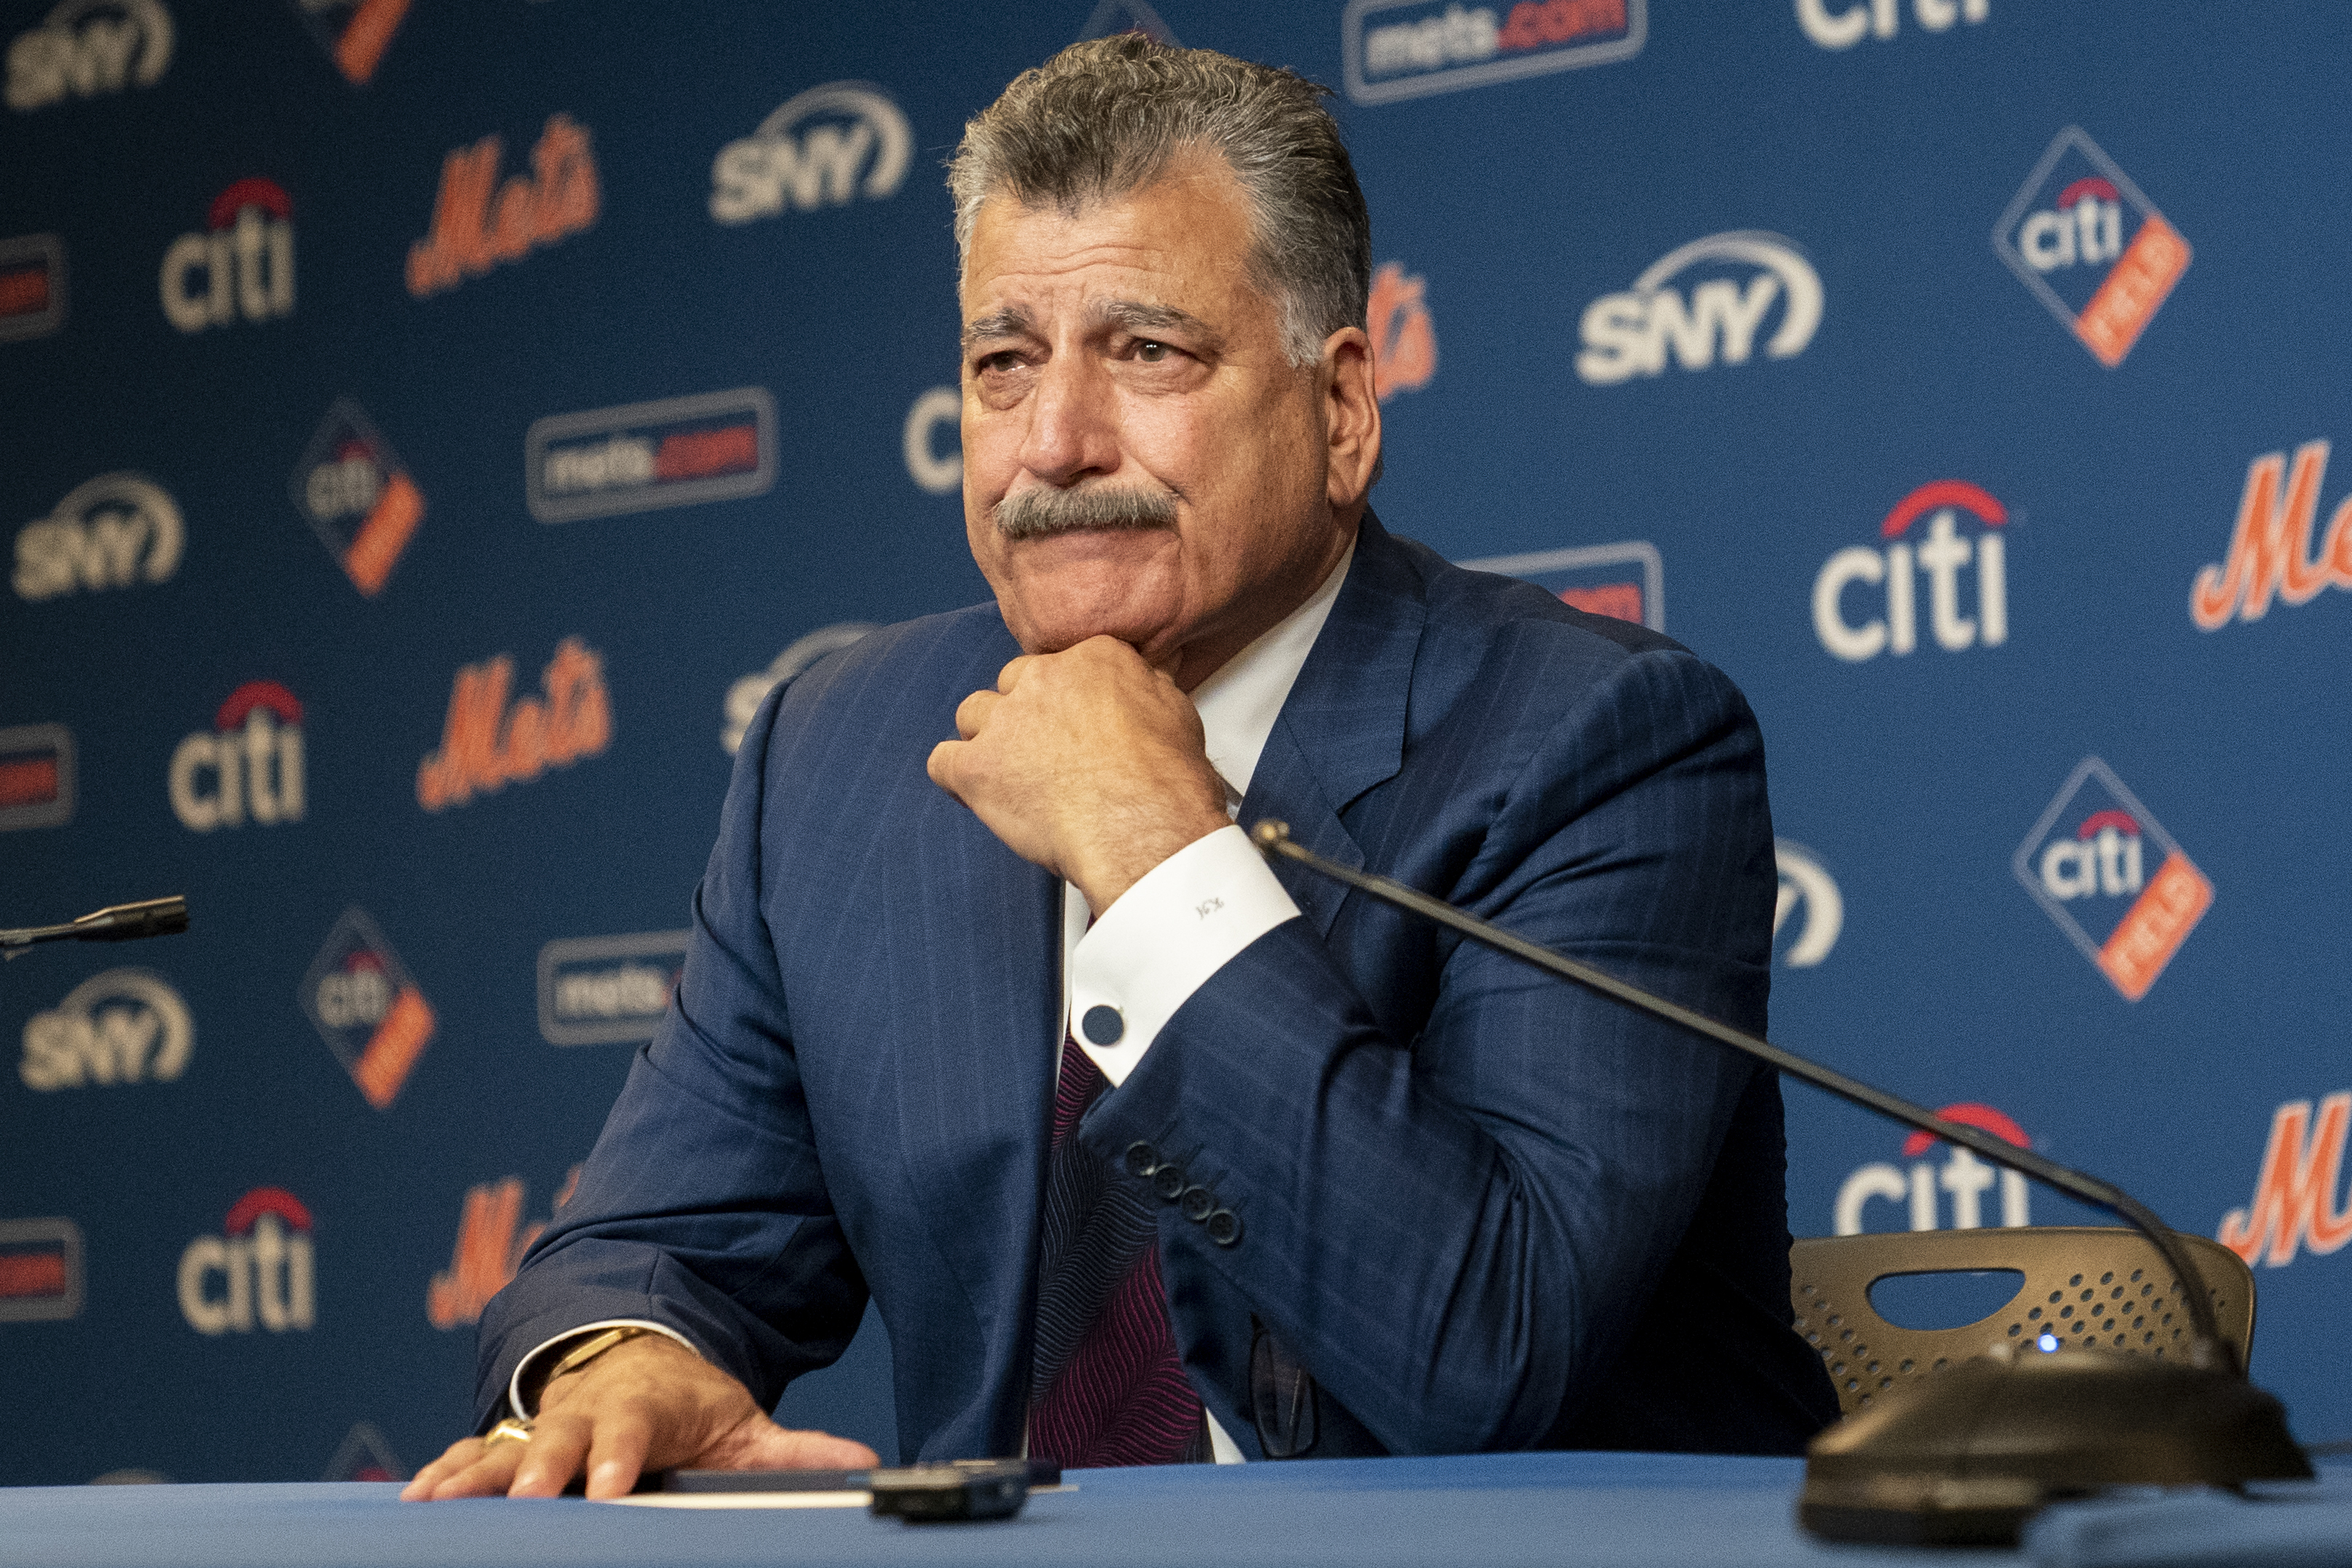 Fiore family shares a smile with Mets' Keith Hernandez